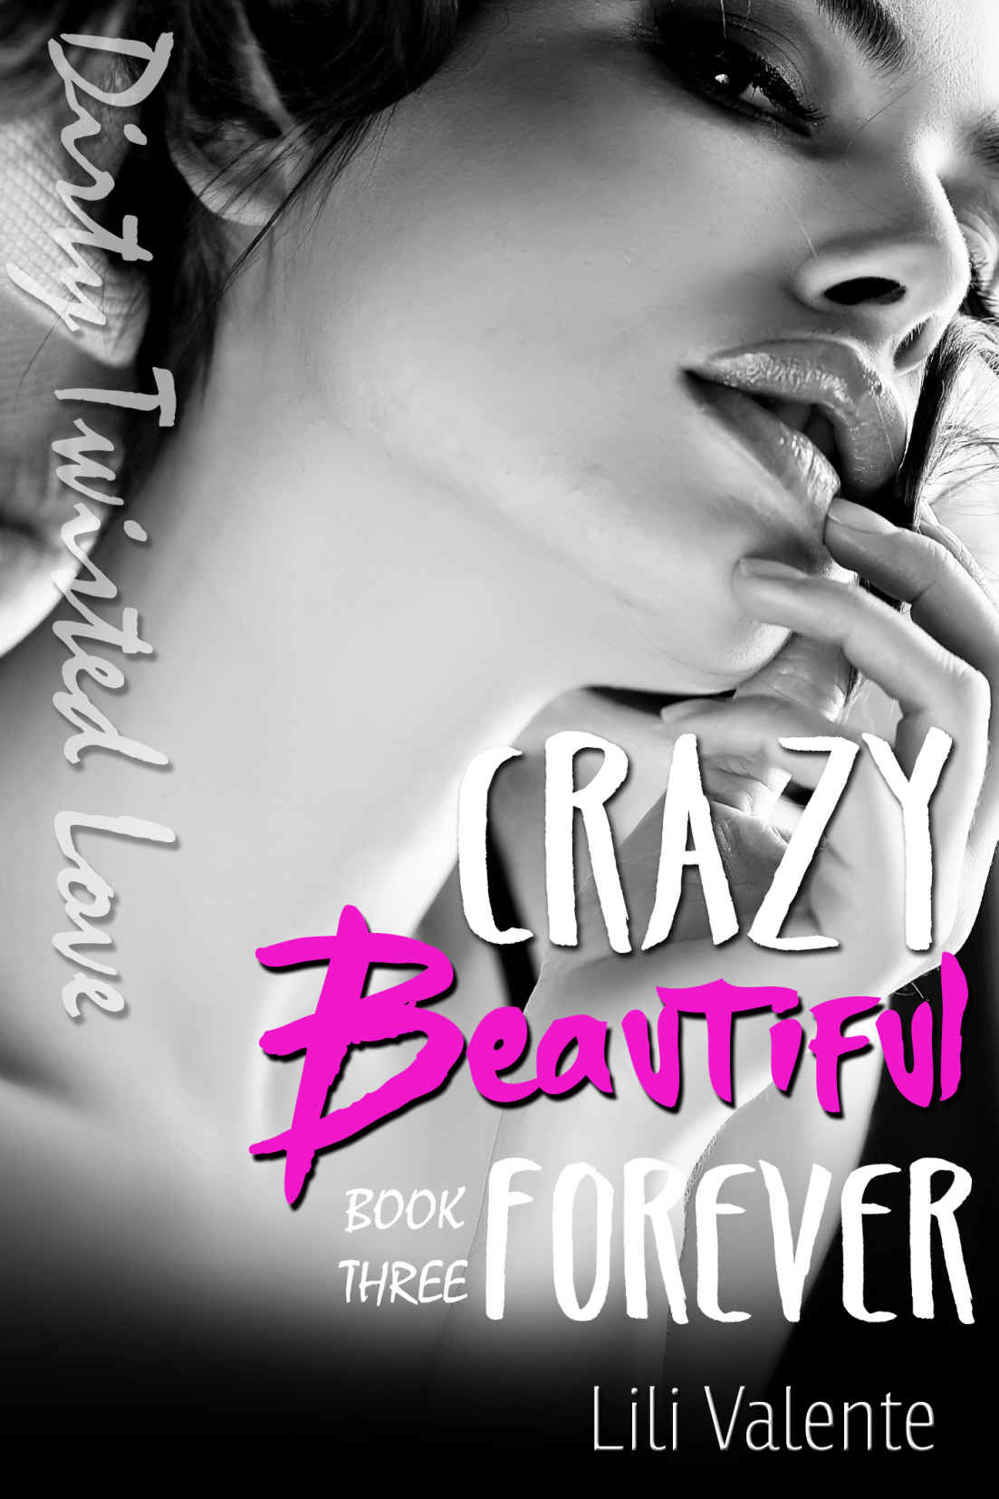 Crazy Beautiful Forever (Dirty Twisted Love #3) by Lili Valente